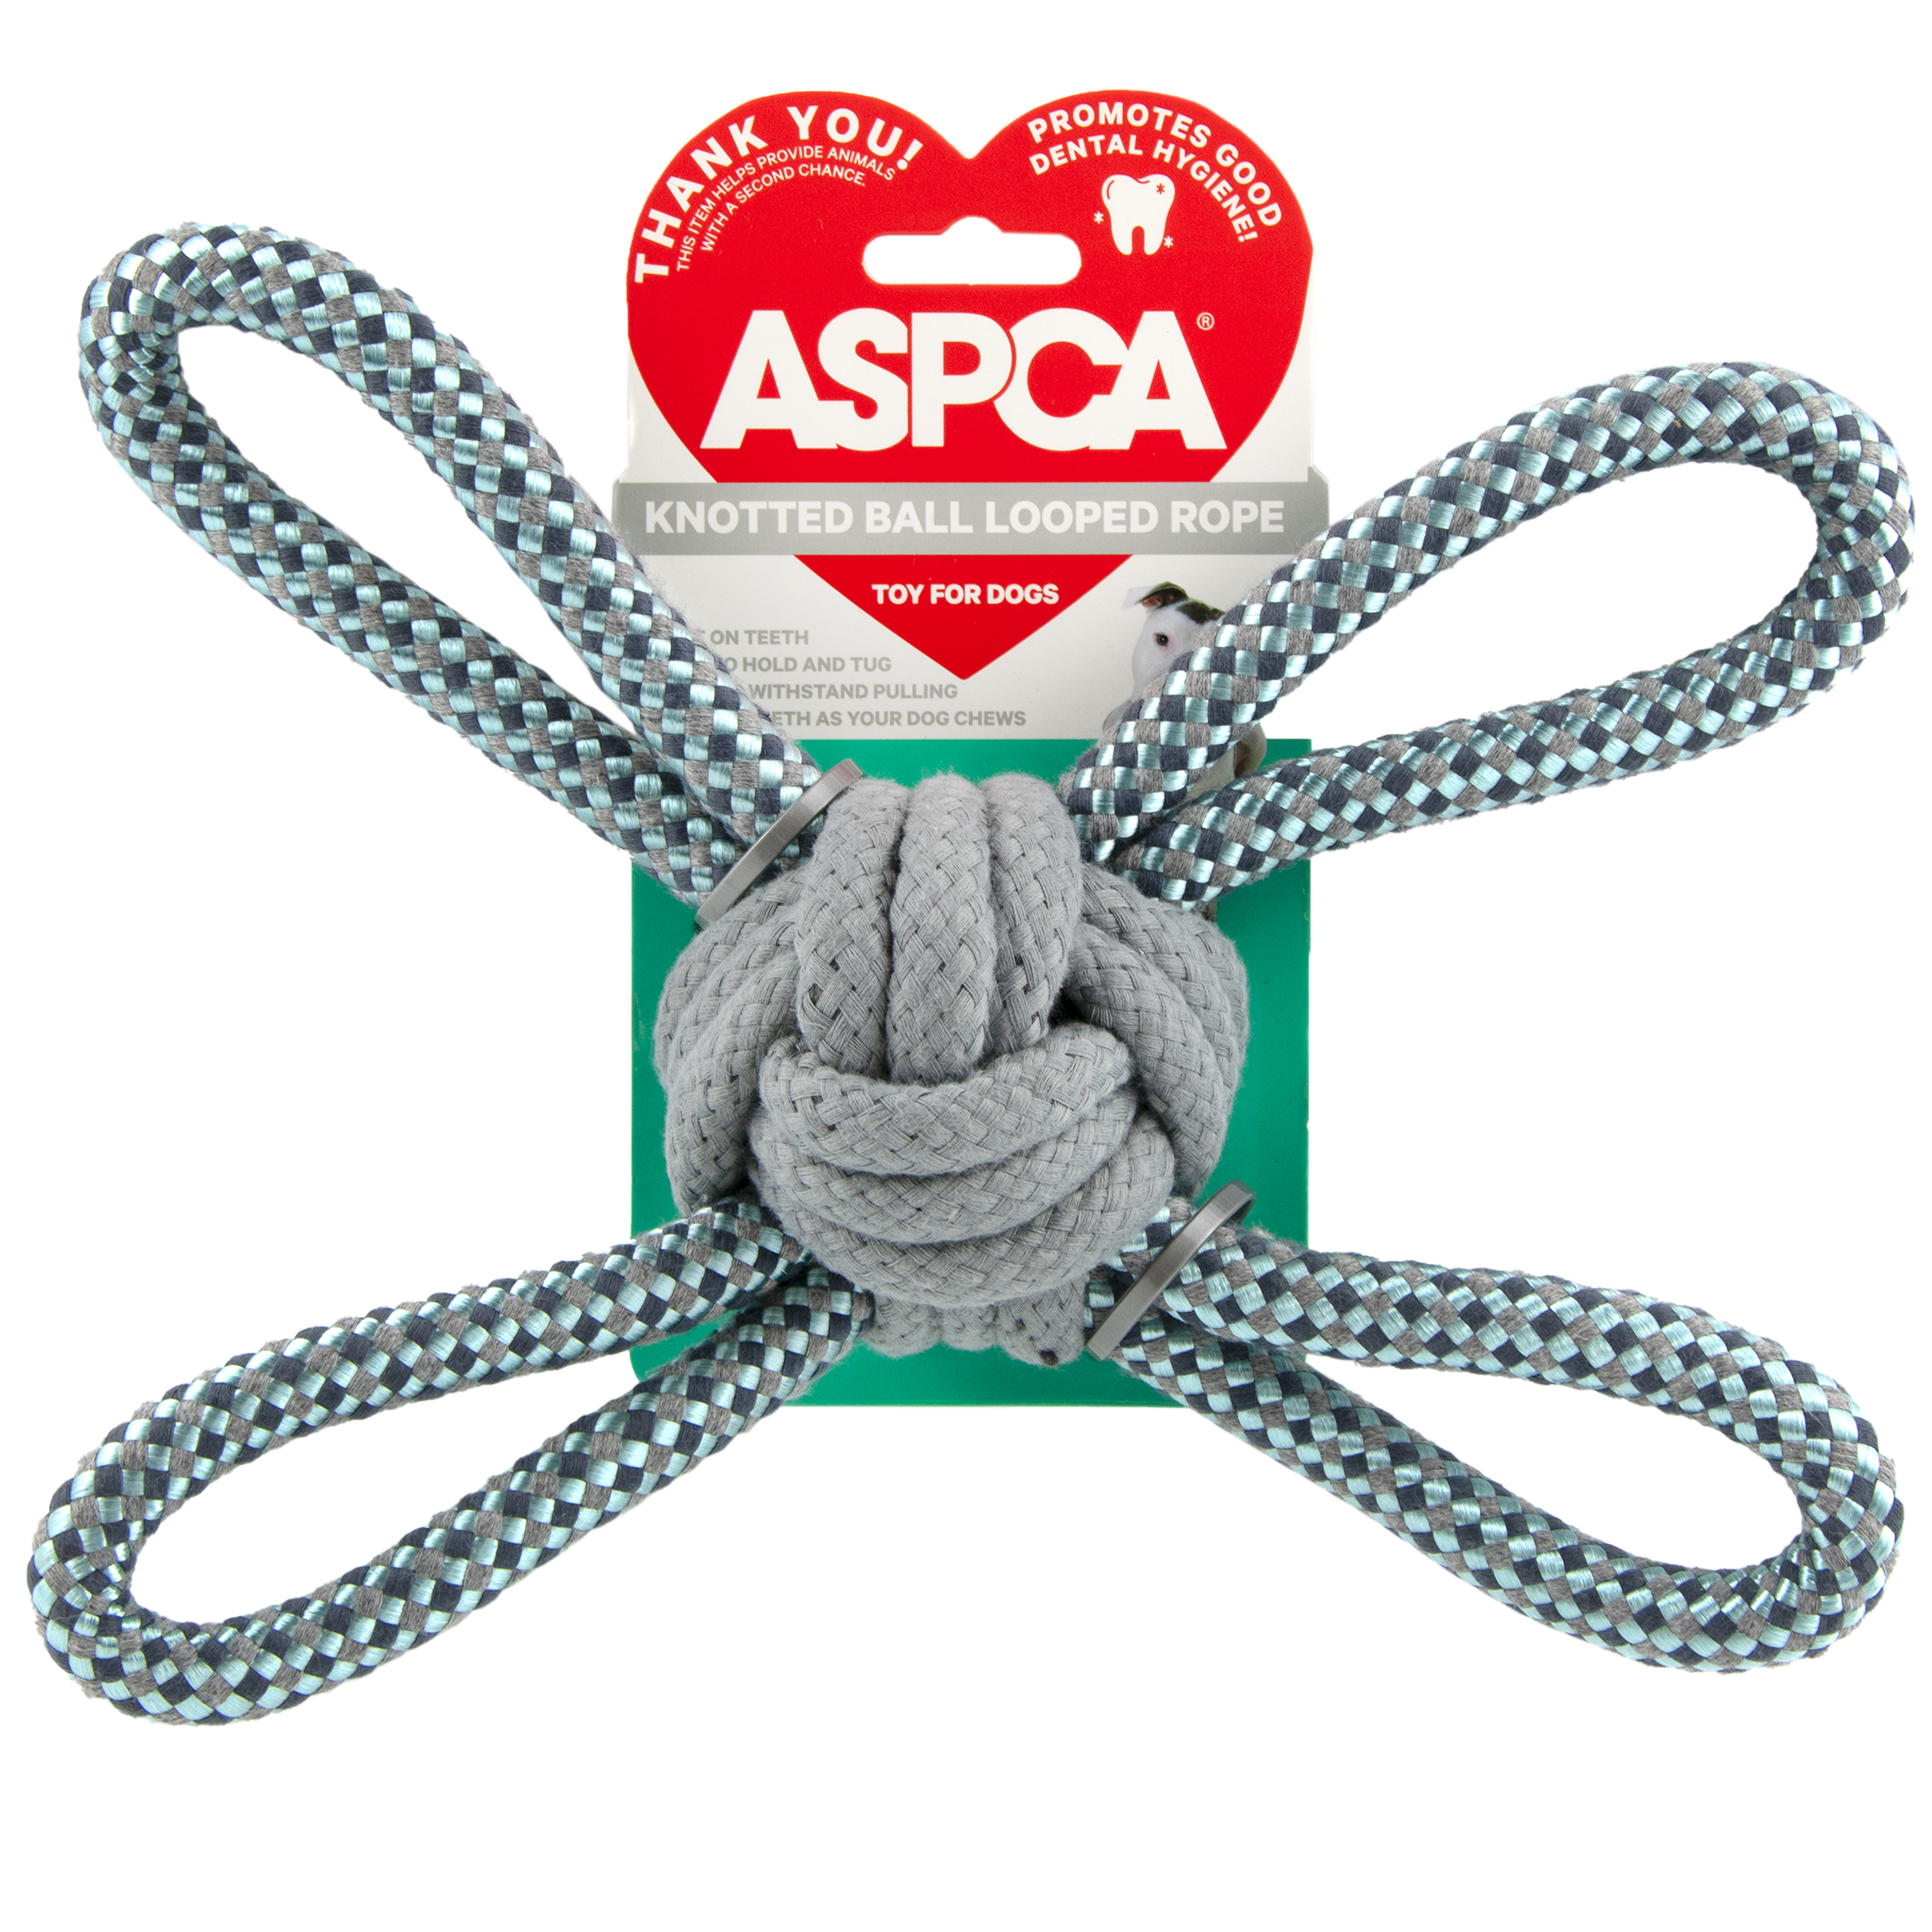 ASPCA Knotted Ball Looped Rope Dog Toy in Aqua